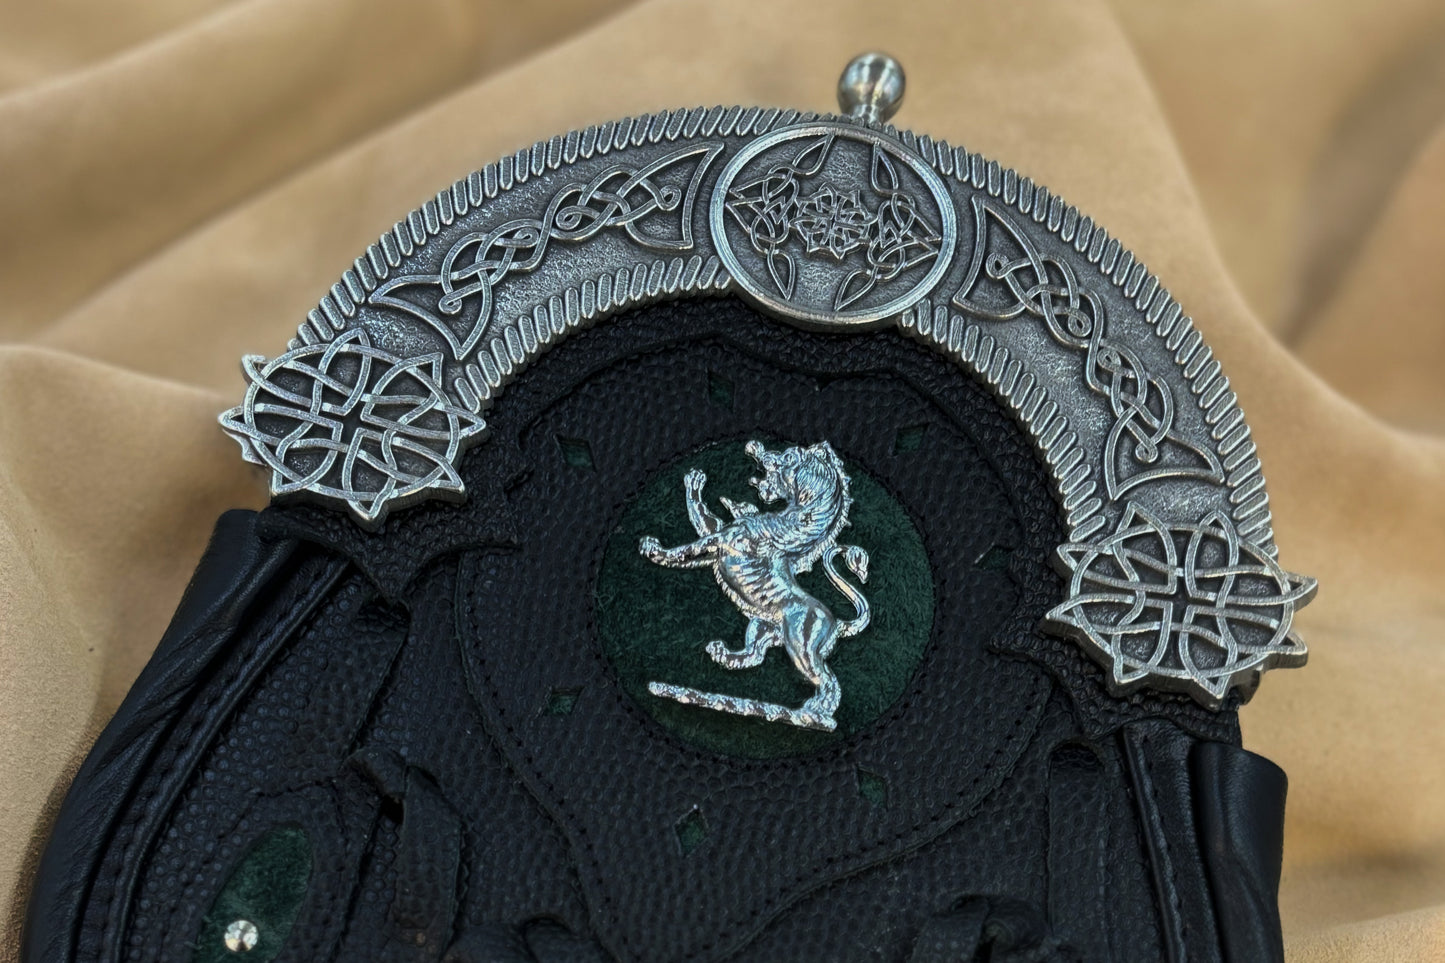 This hunting sporran version utilizes pebbled leather petals with green inlay and a targe with a green inlay and a lion rampant badge. It features the standard 5 petals, pewter cantle with celtic knotwork, and chrome studwork.